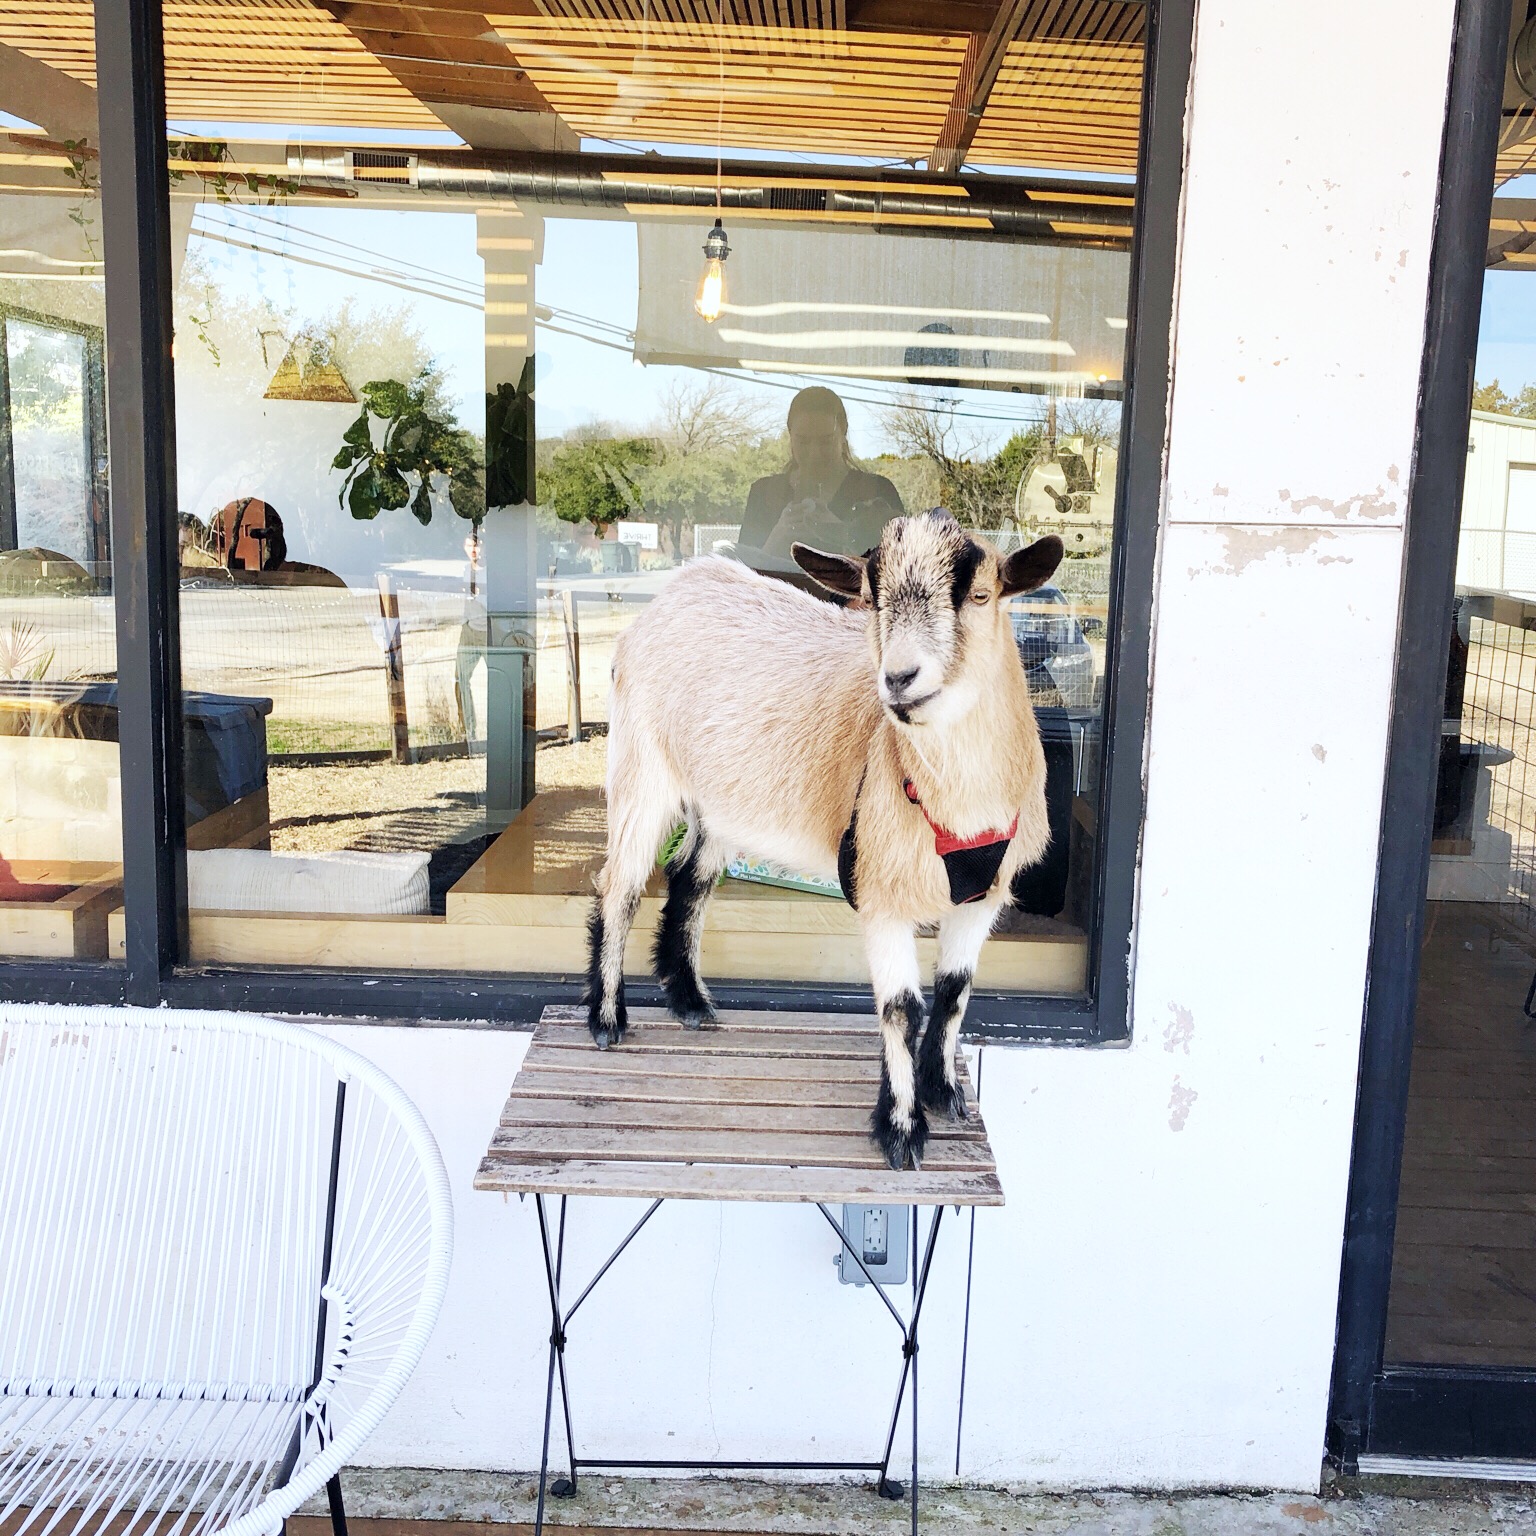 The goat of Civil Goat Coffee standing on a table outside the shop's front door